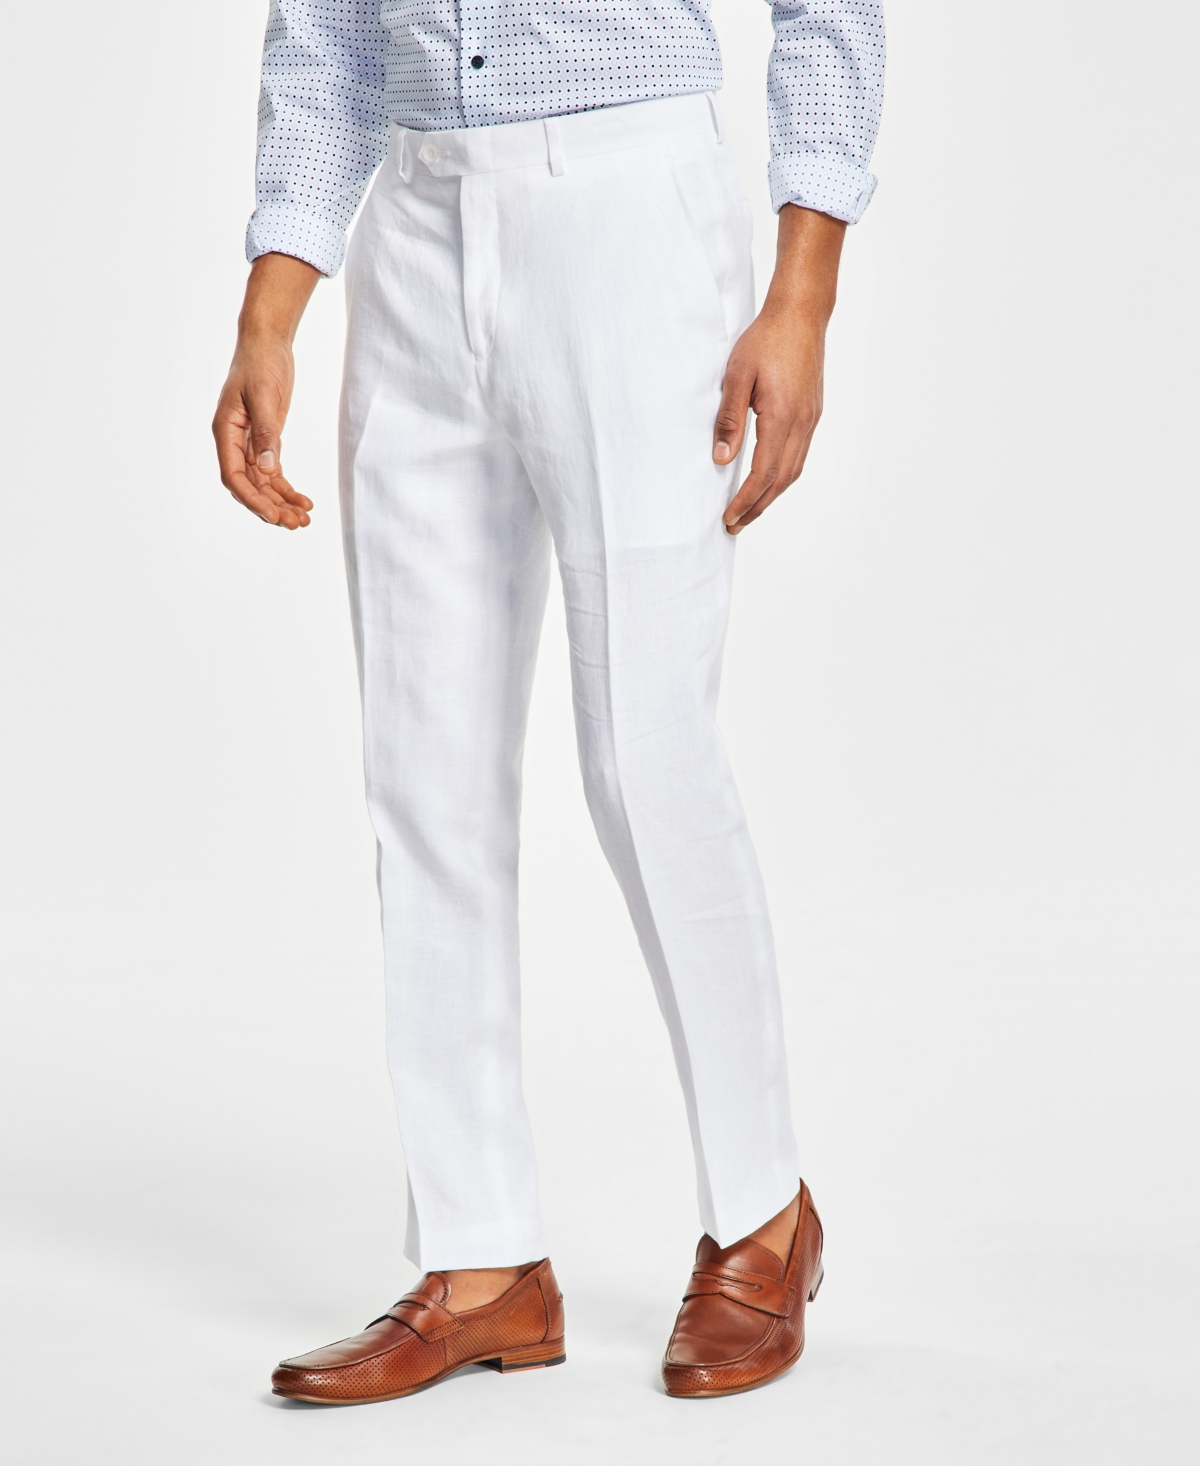 BAR III MEN'S SLIM-FIT TEXTURED LINEN SUIT SEPARATE PANT, CREATED FOR MACY'S